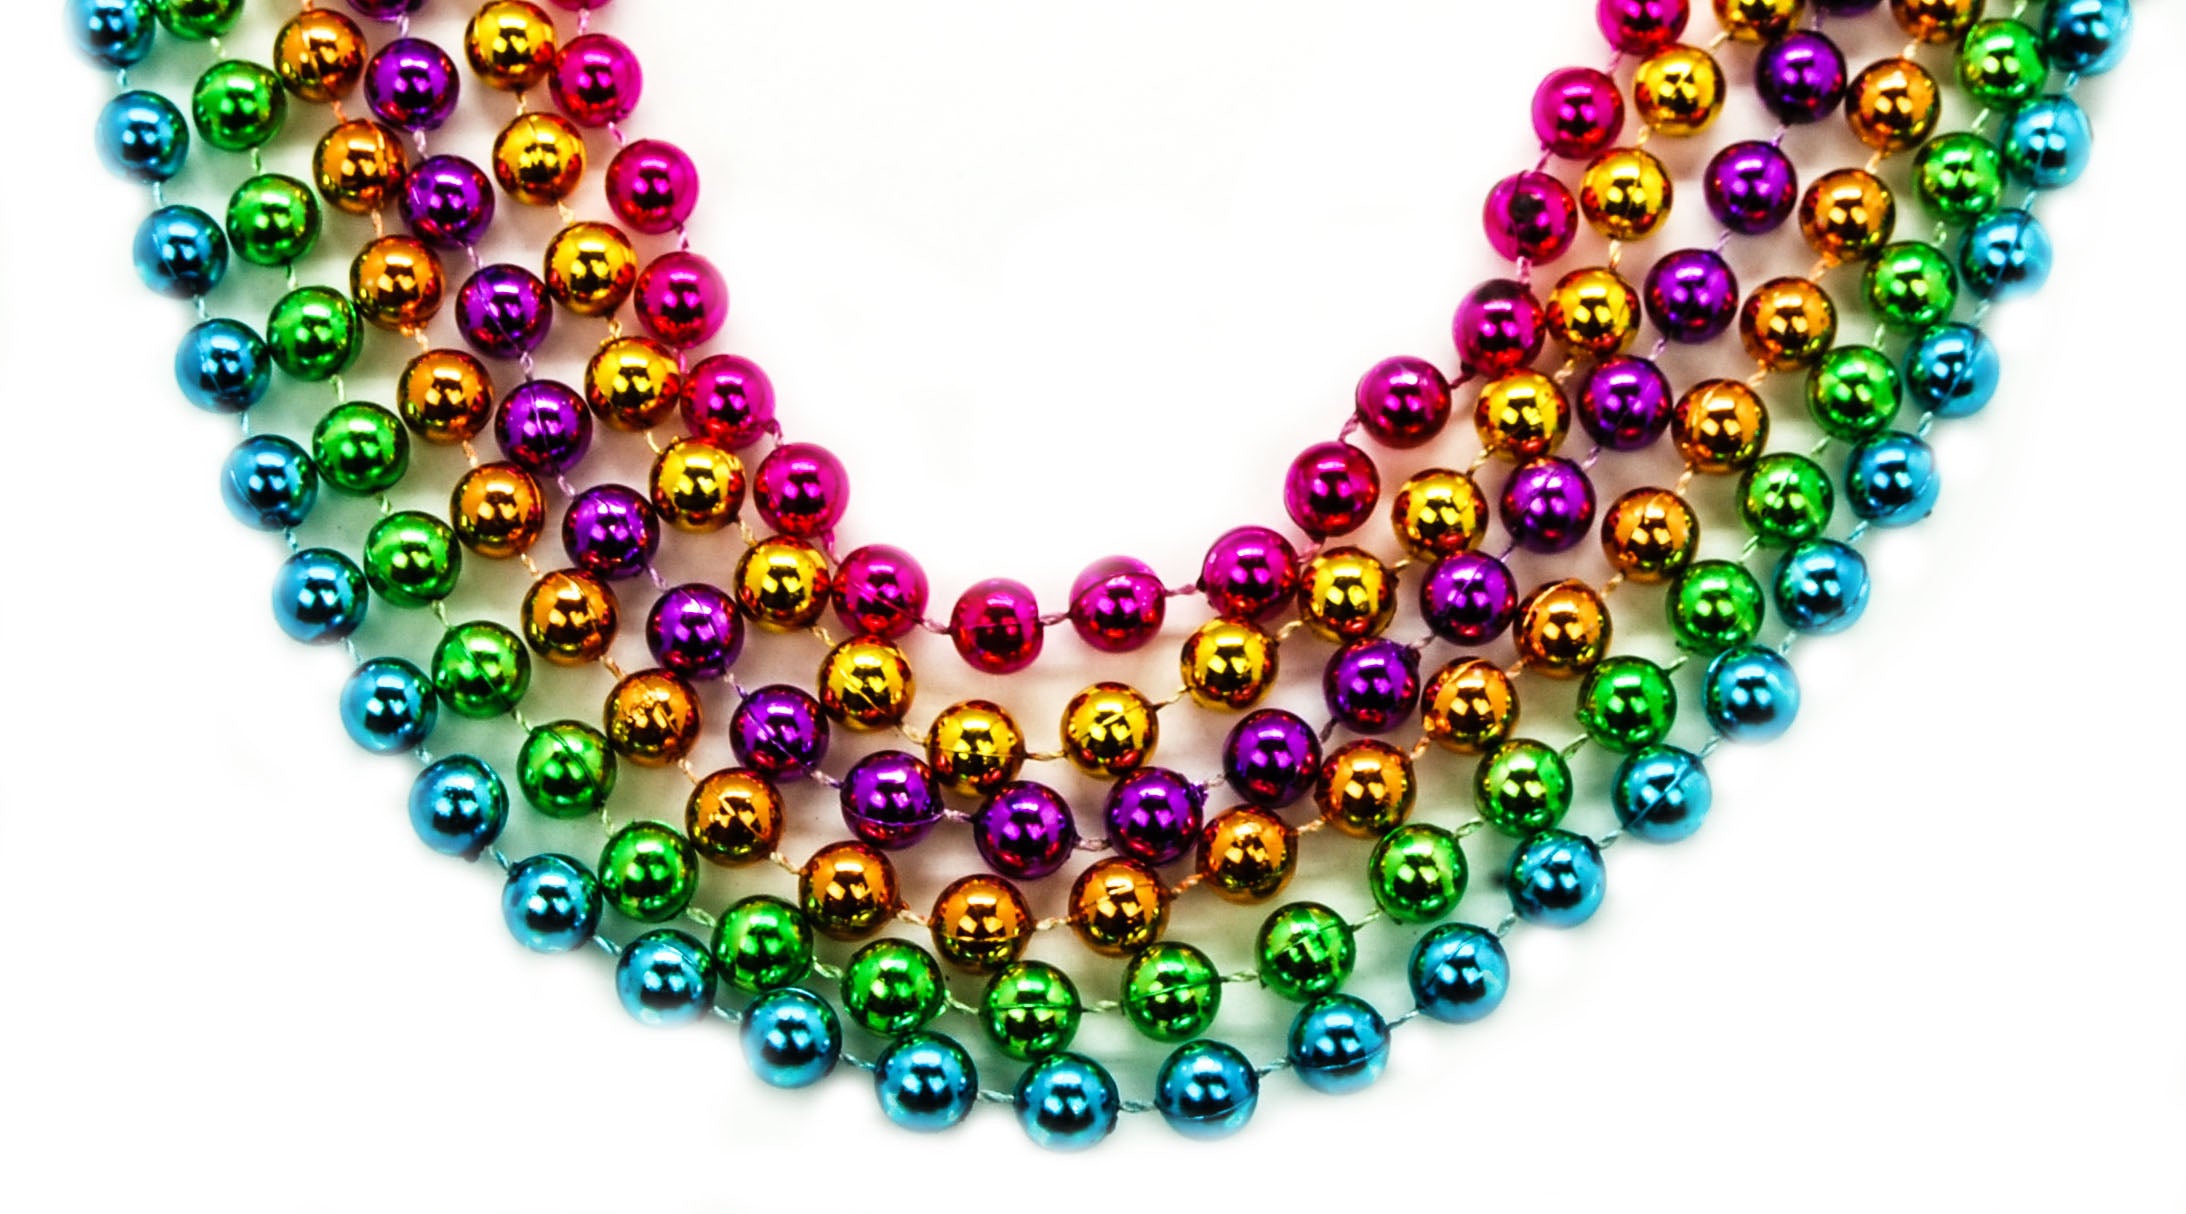 48" 10mm Round Beads Assorted Neon Colors